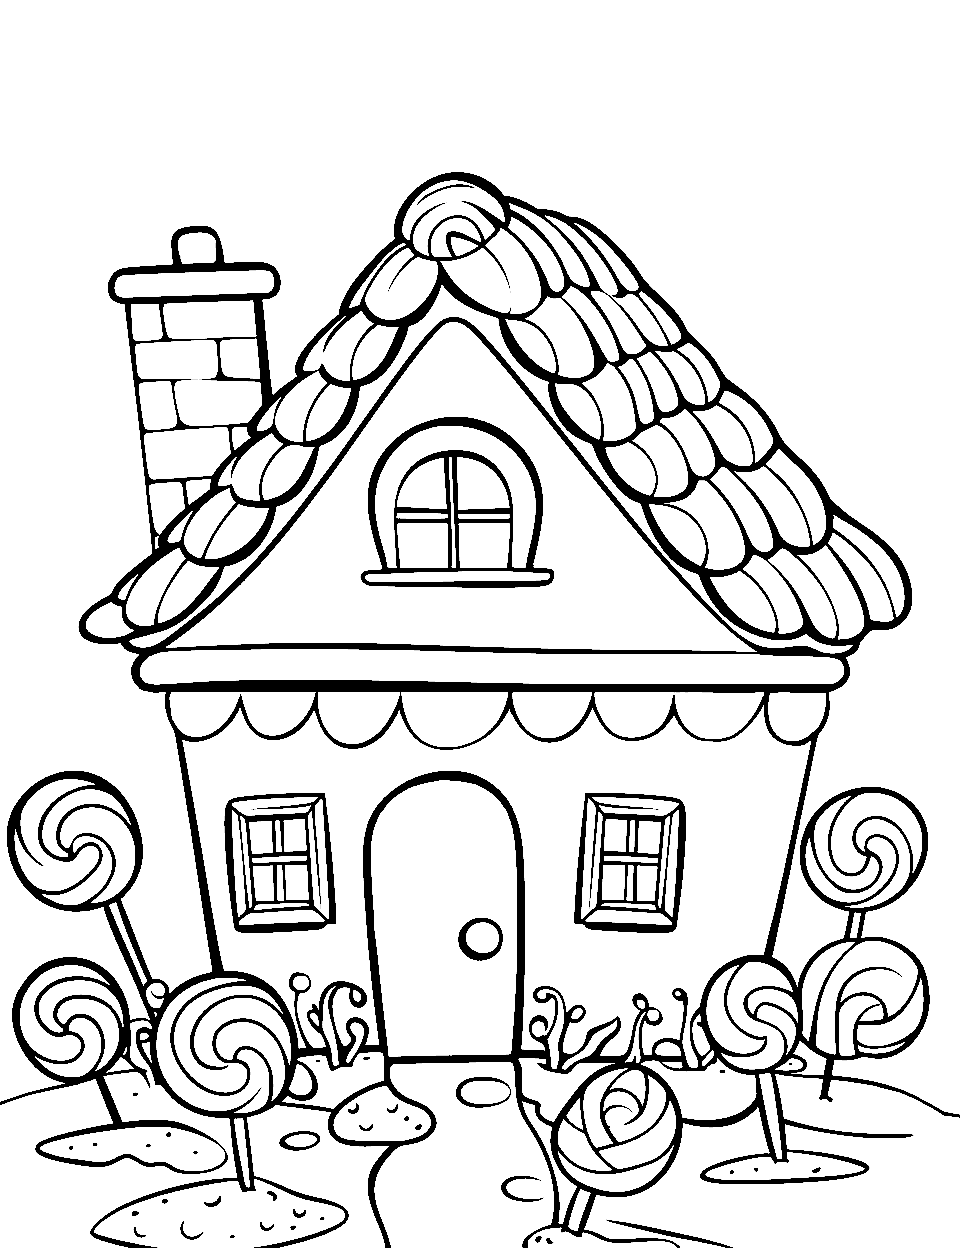 My New Home Kids Coloring Book: Coloring Pages with Lovely Design of Home  for Kids, Toddlers, Boys and Girls (Paperback)